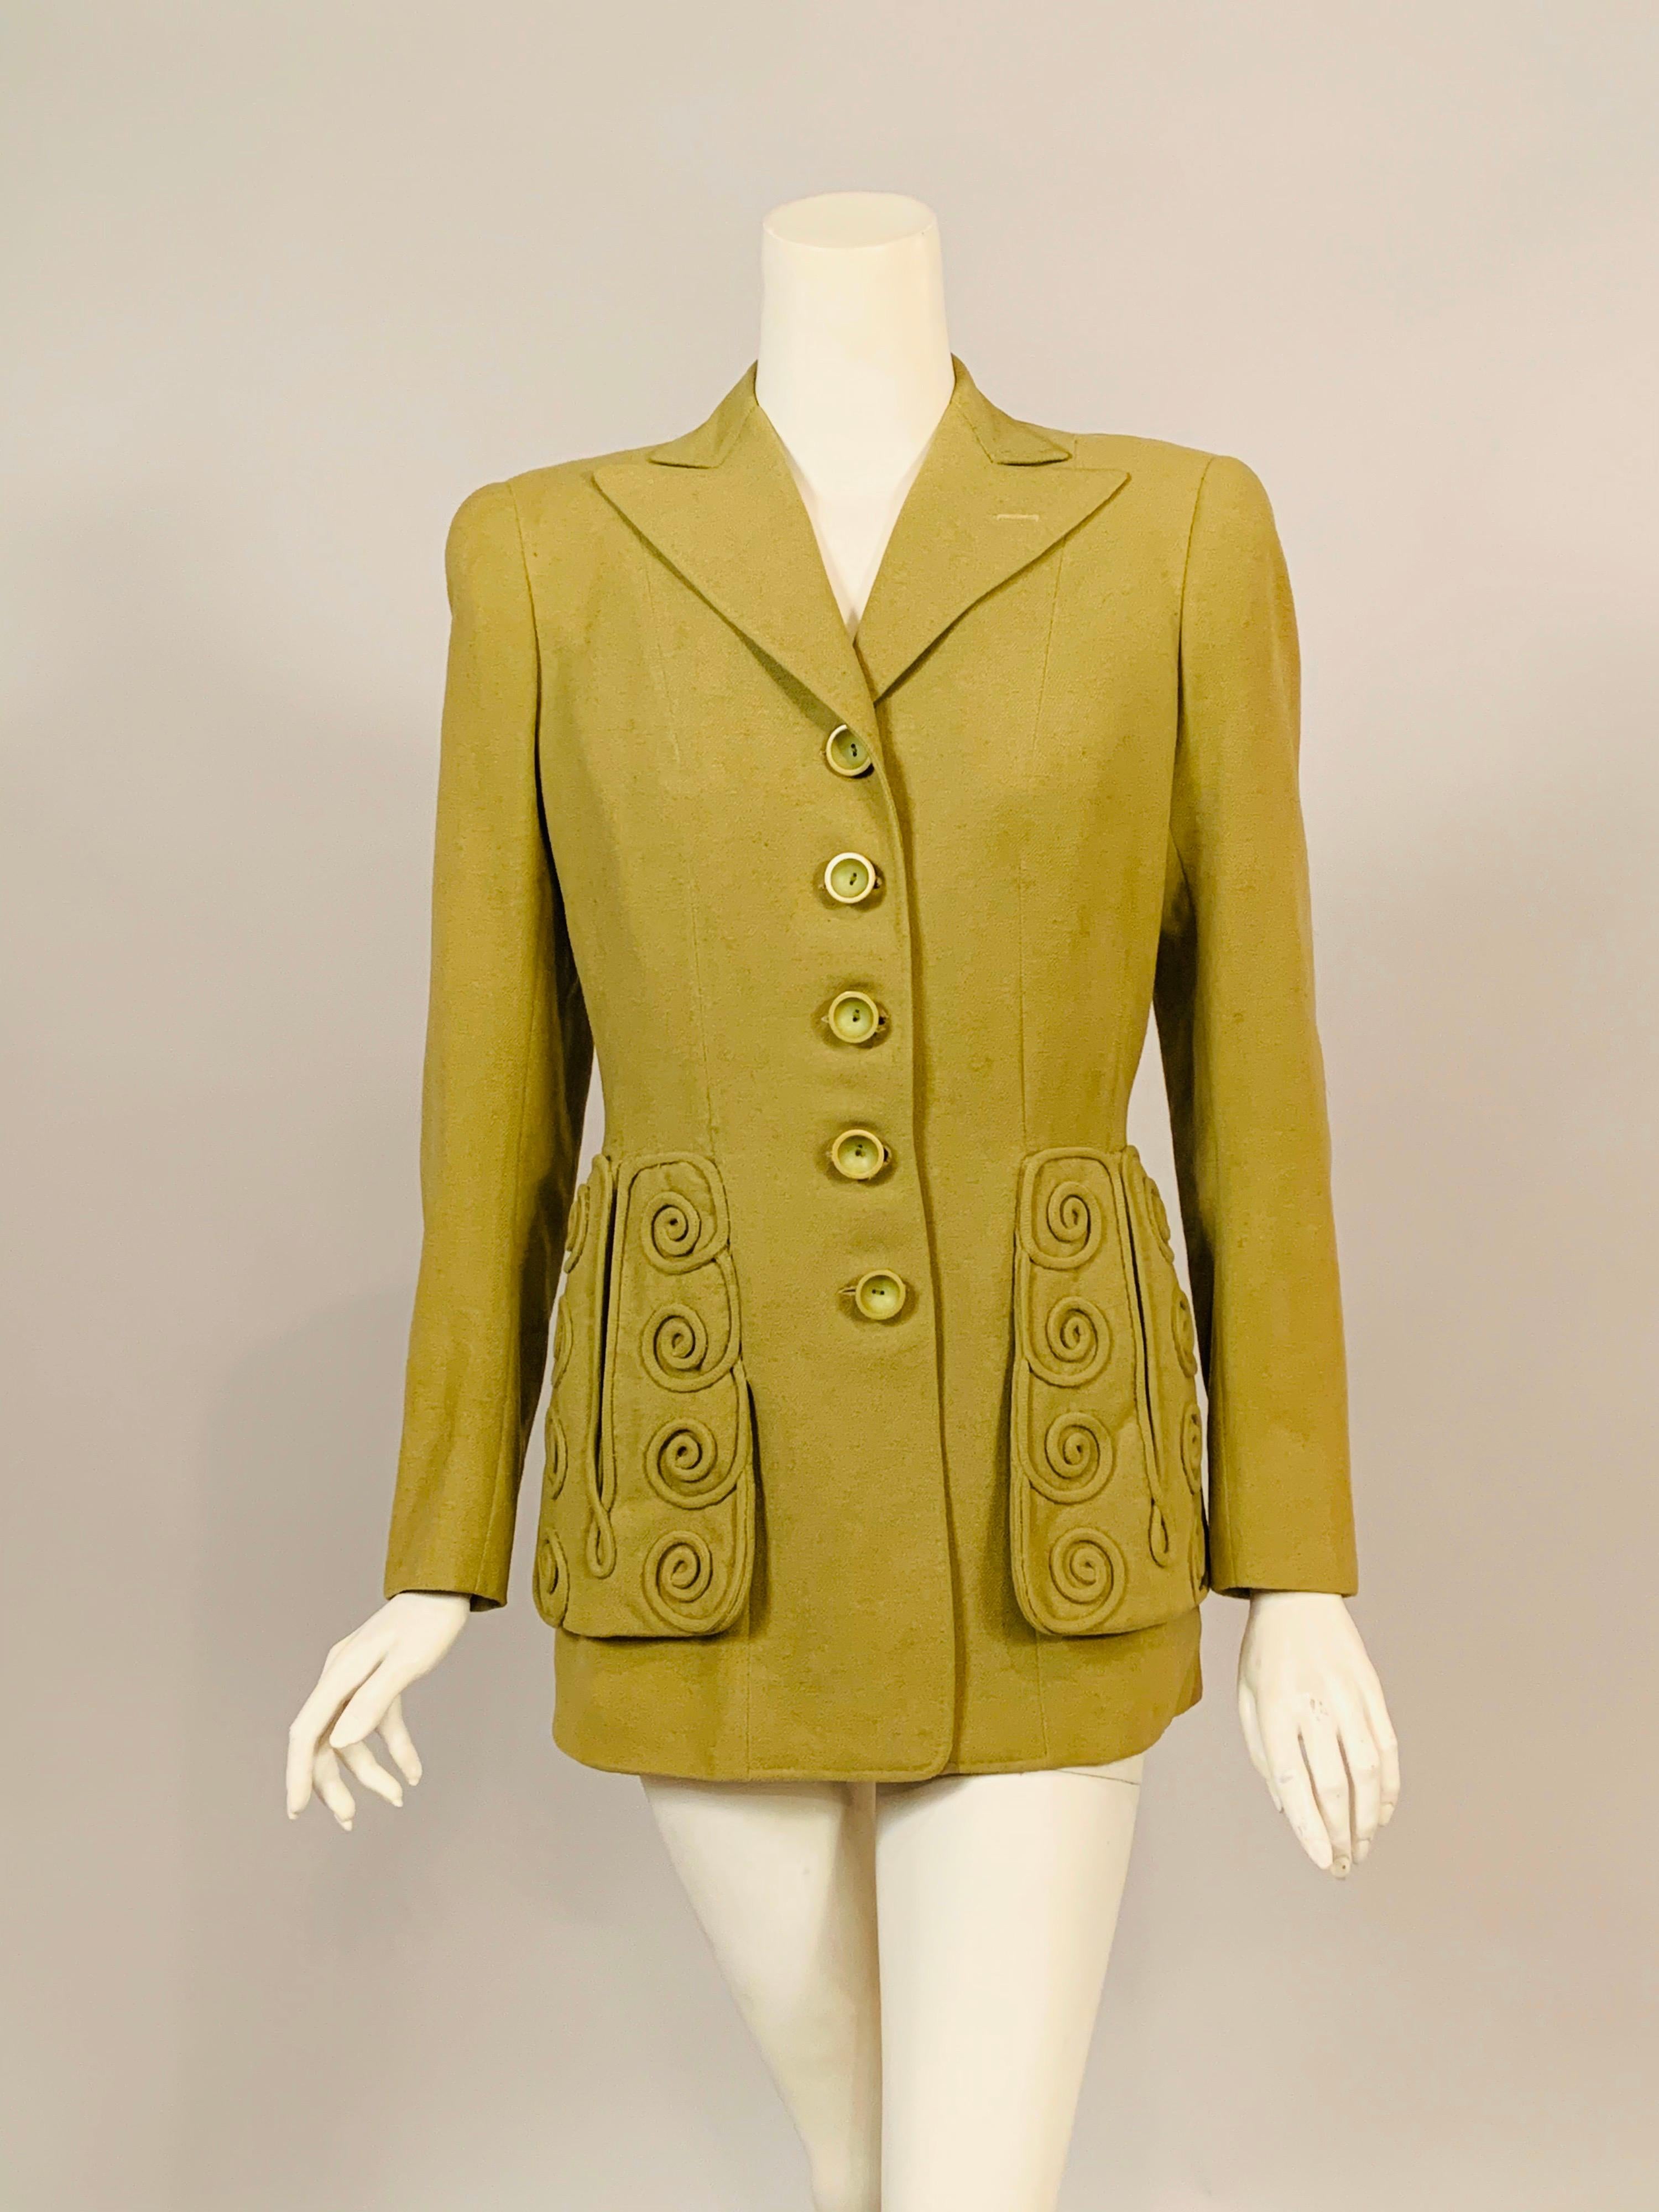 This is a wonderful example of the designs of Jeanne Lanvin, created in May, 1944 during World War II when many French Couture Houses had closed their doors. A Spring green wool jacket, from her Sportswear line, has five buttons at the center front,